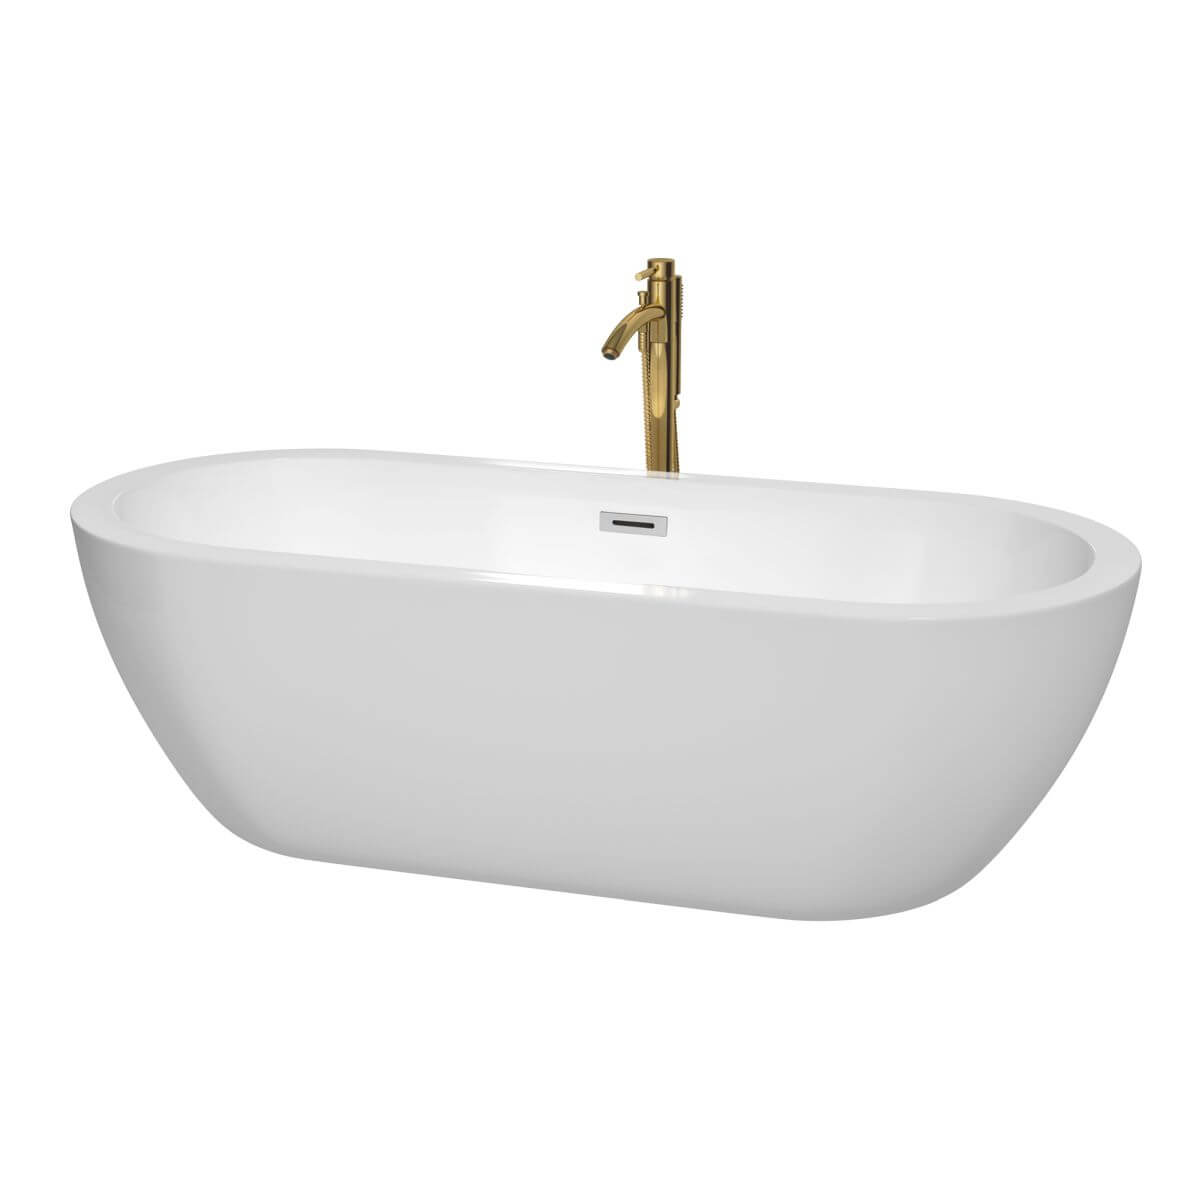 Wyndham Collection Soho 72 inch Freestanding Bathtub in White with Polished Chrome Trim and Floor Mounted Faucet in Brushed Gold - WCOBT100272PCATPGD